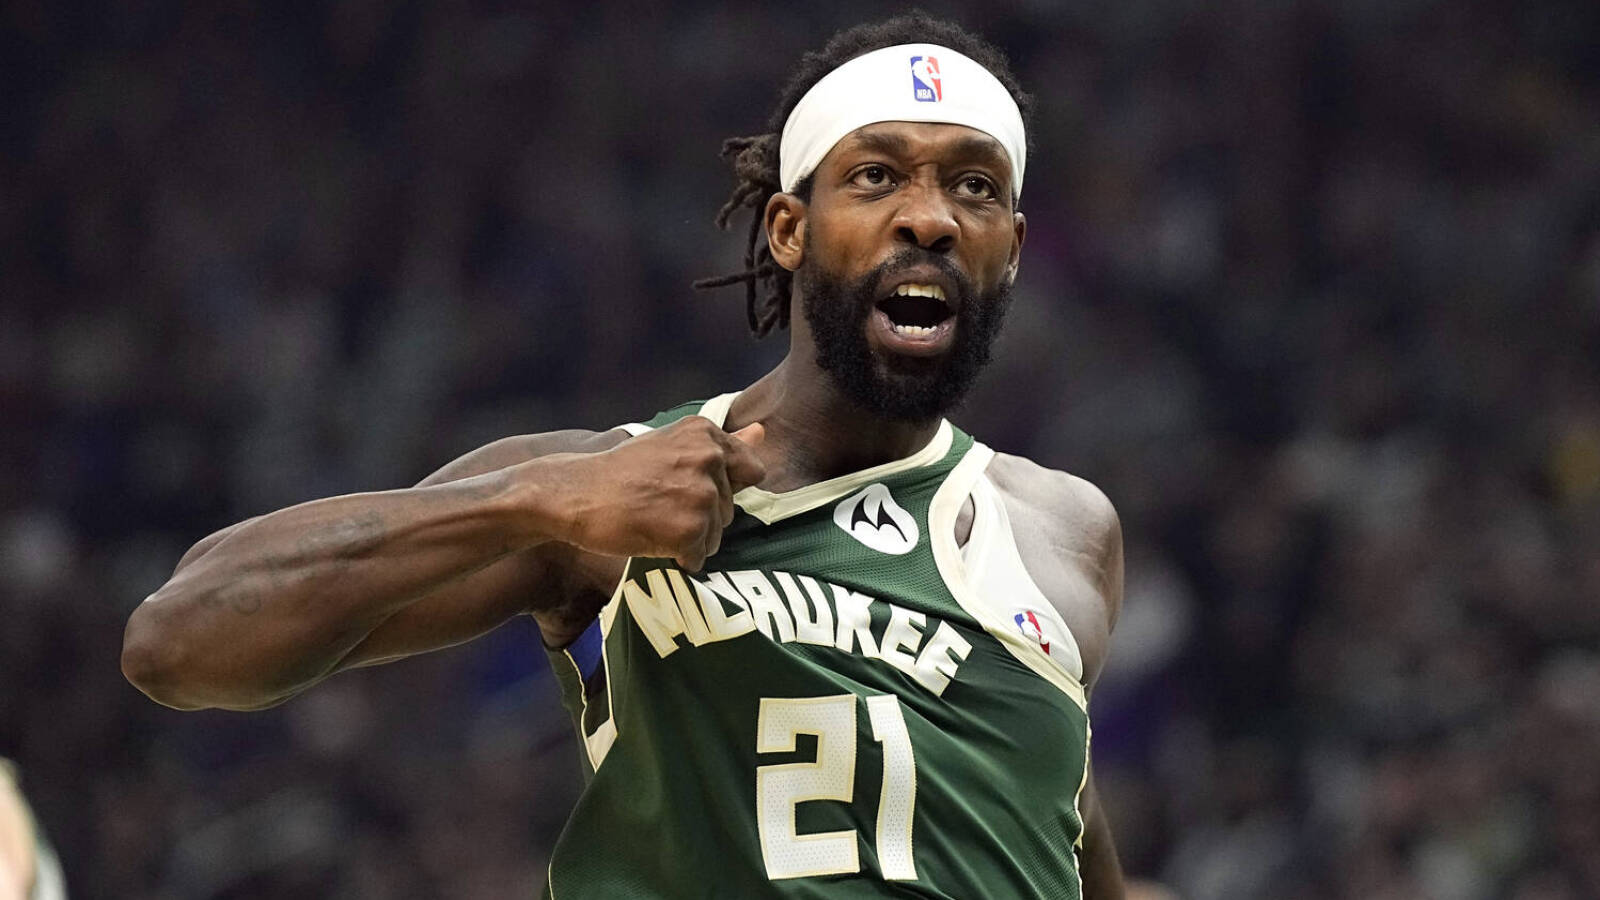 Here's what Pacers fan reportedly said to anger Patrick Beverley